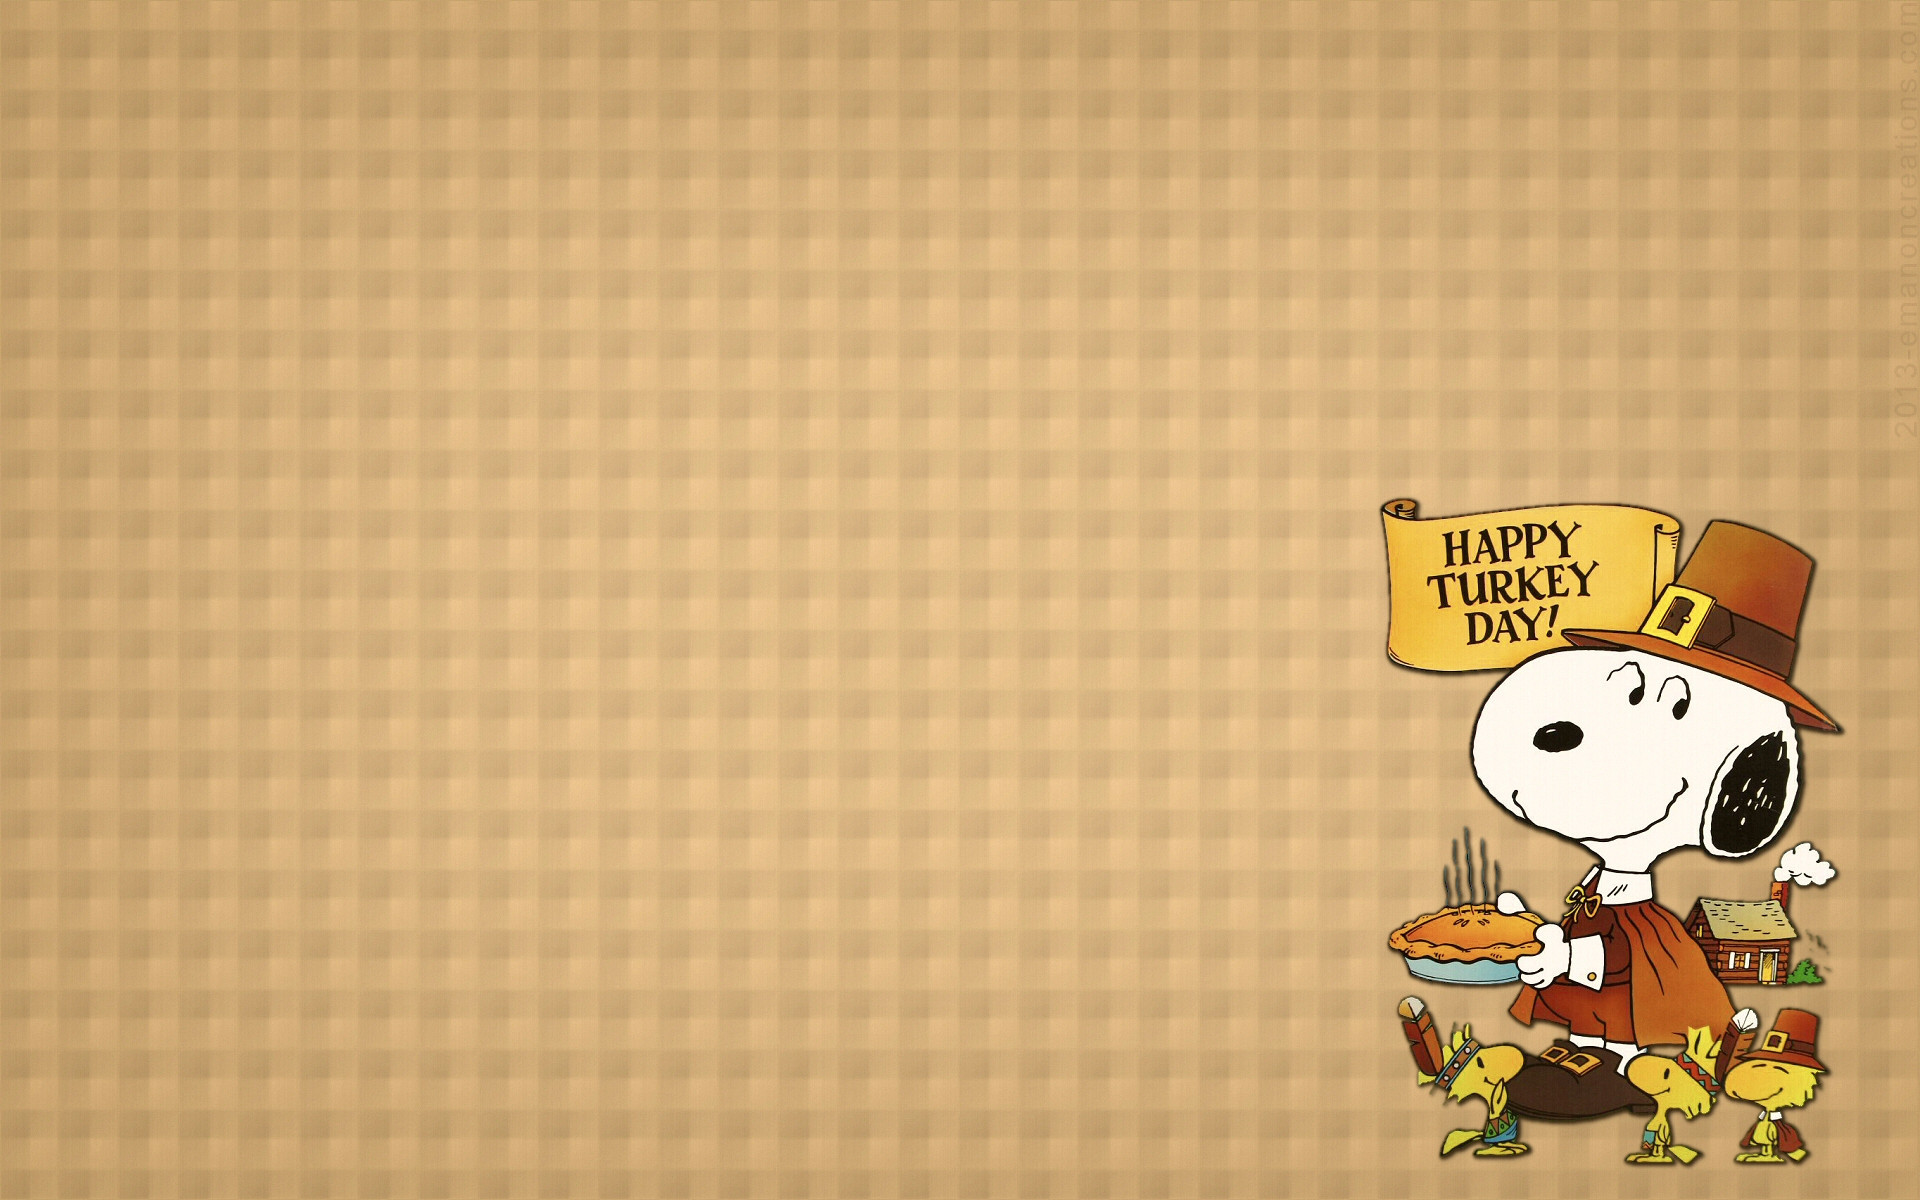 1920x1200 Snoopy thanksgiving backgrounds